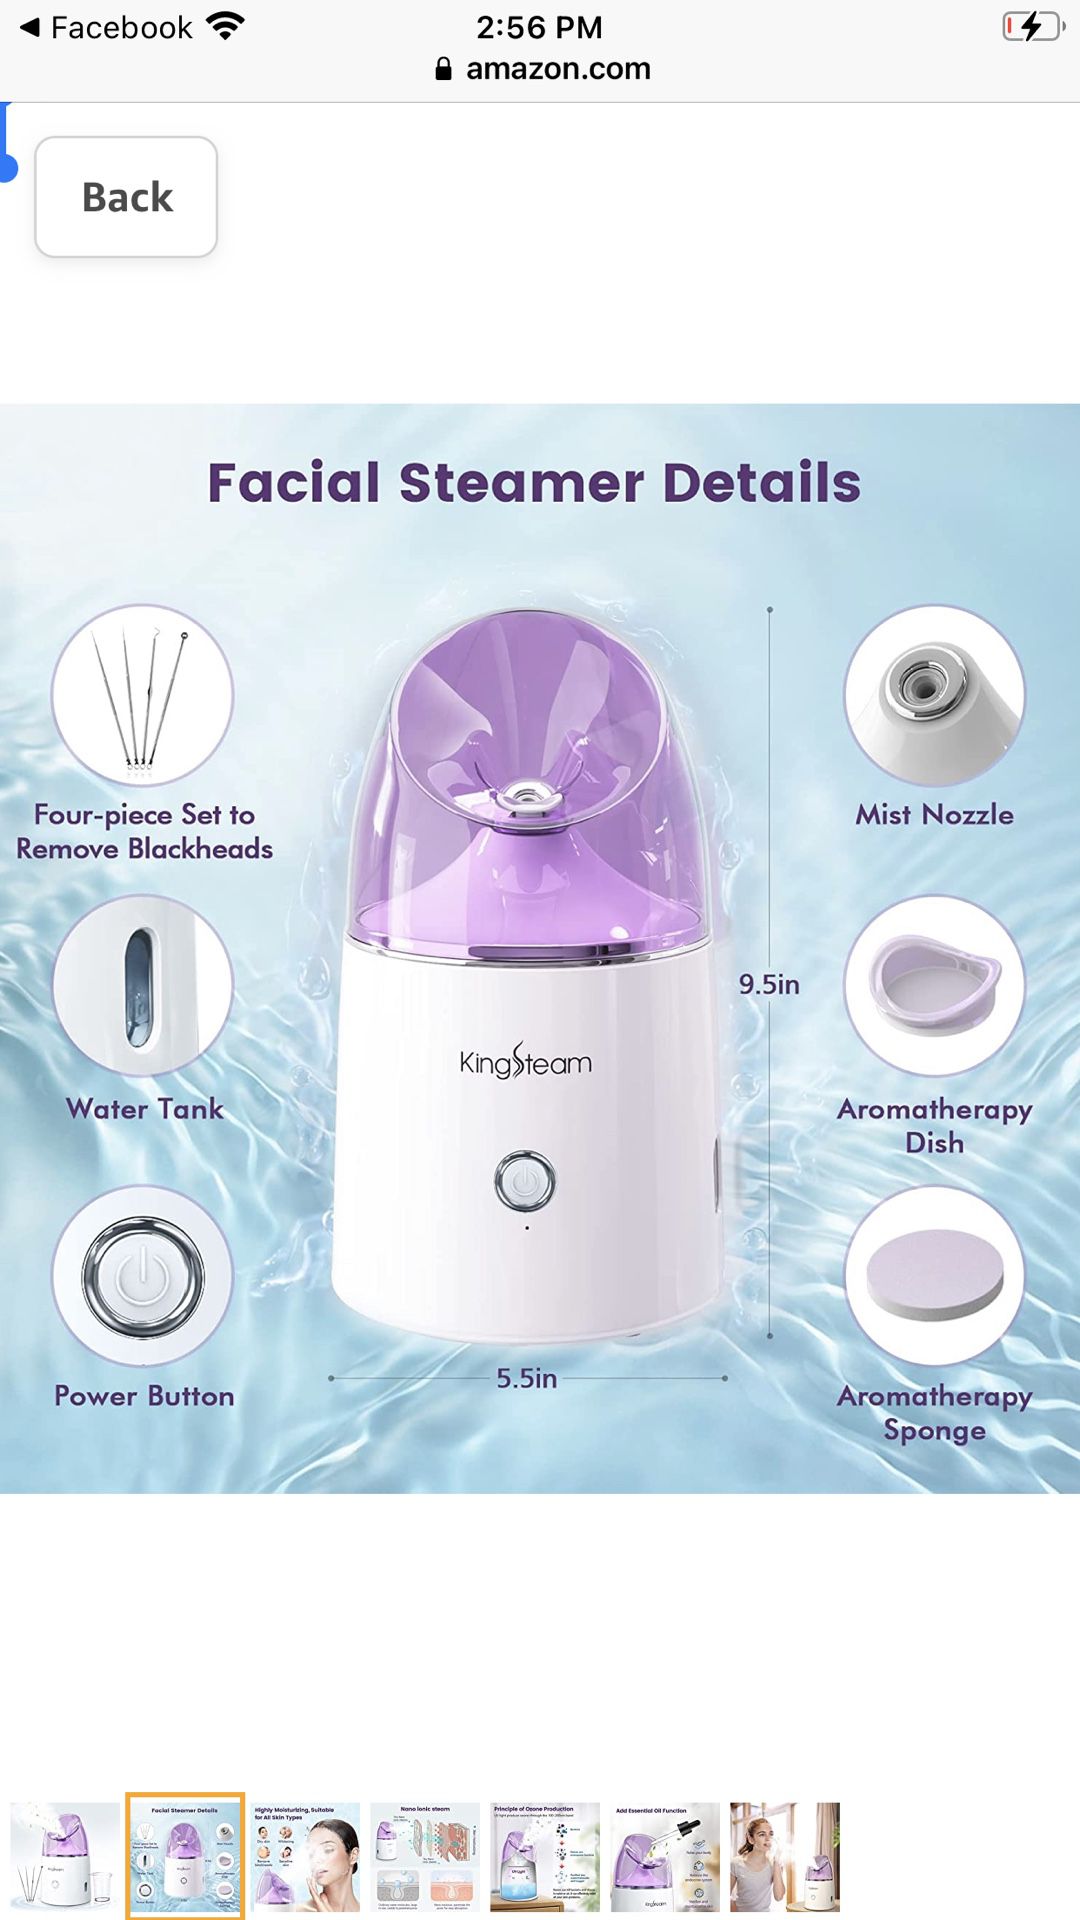  Nano Ionic Facial Steamer，Face Steamer for Home Facial Deep Cleaning, Facial Mister with Moisturizing & Blackhead Removal Kits for Estheticians, Home